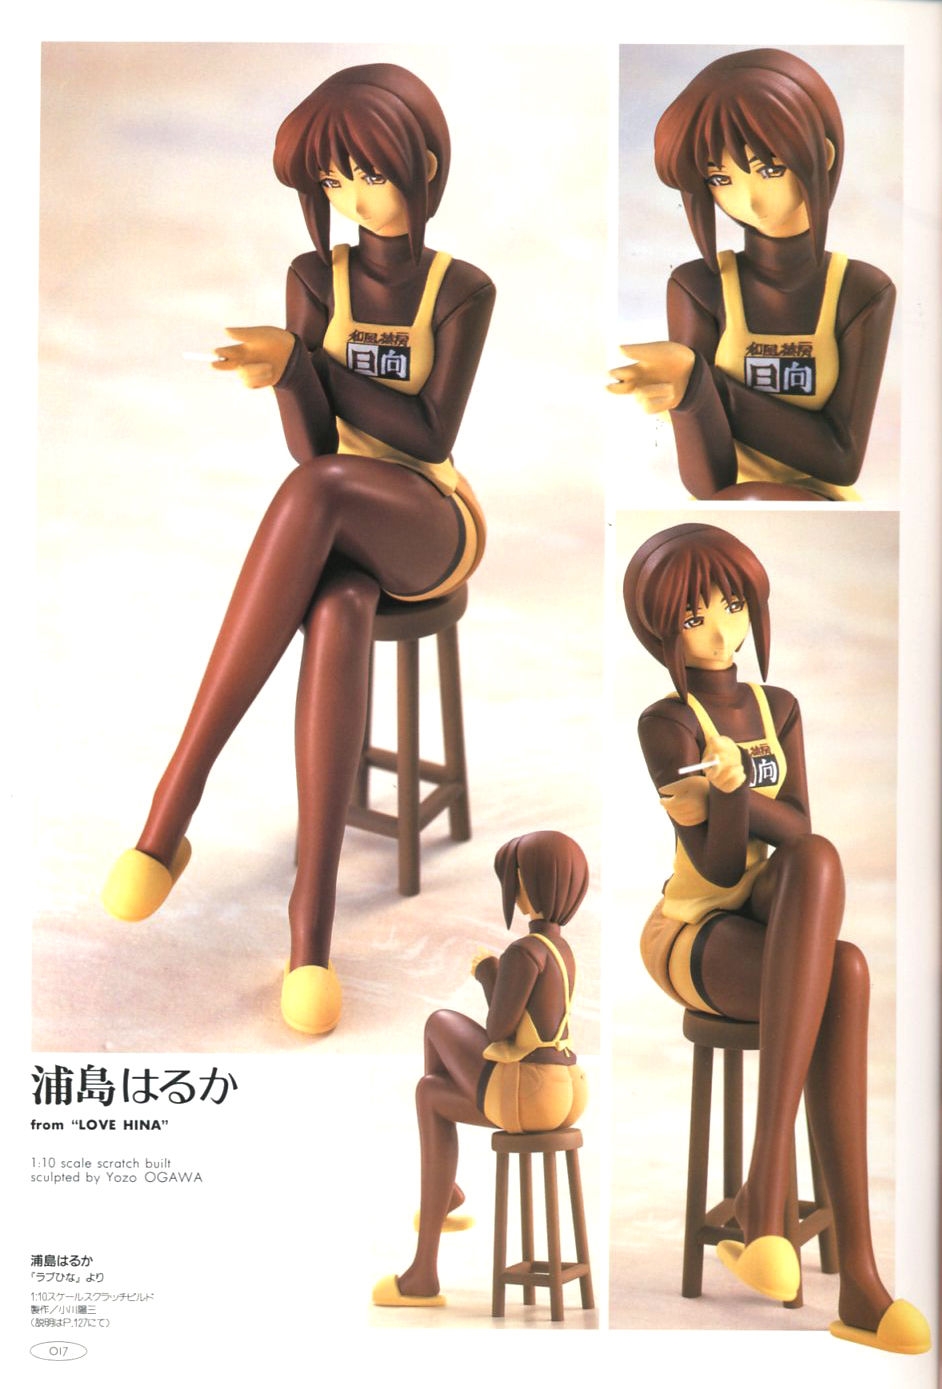 Hobby Japan Mook All That Figure 2001 11